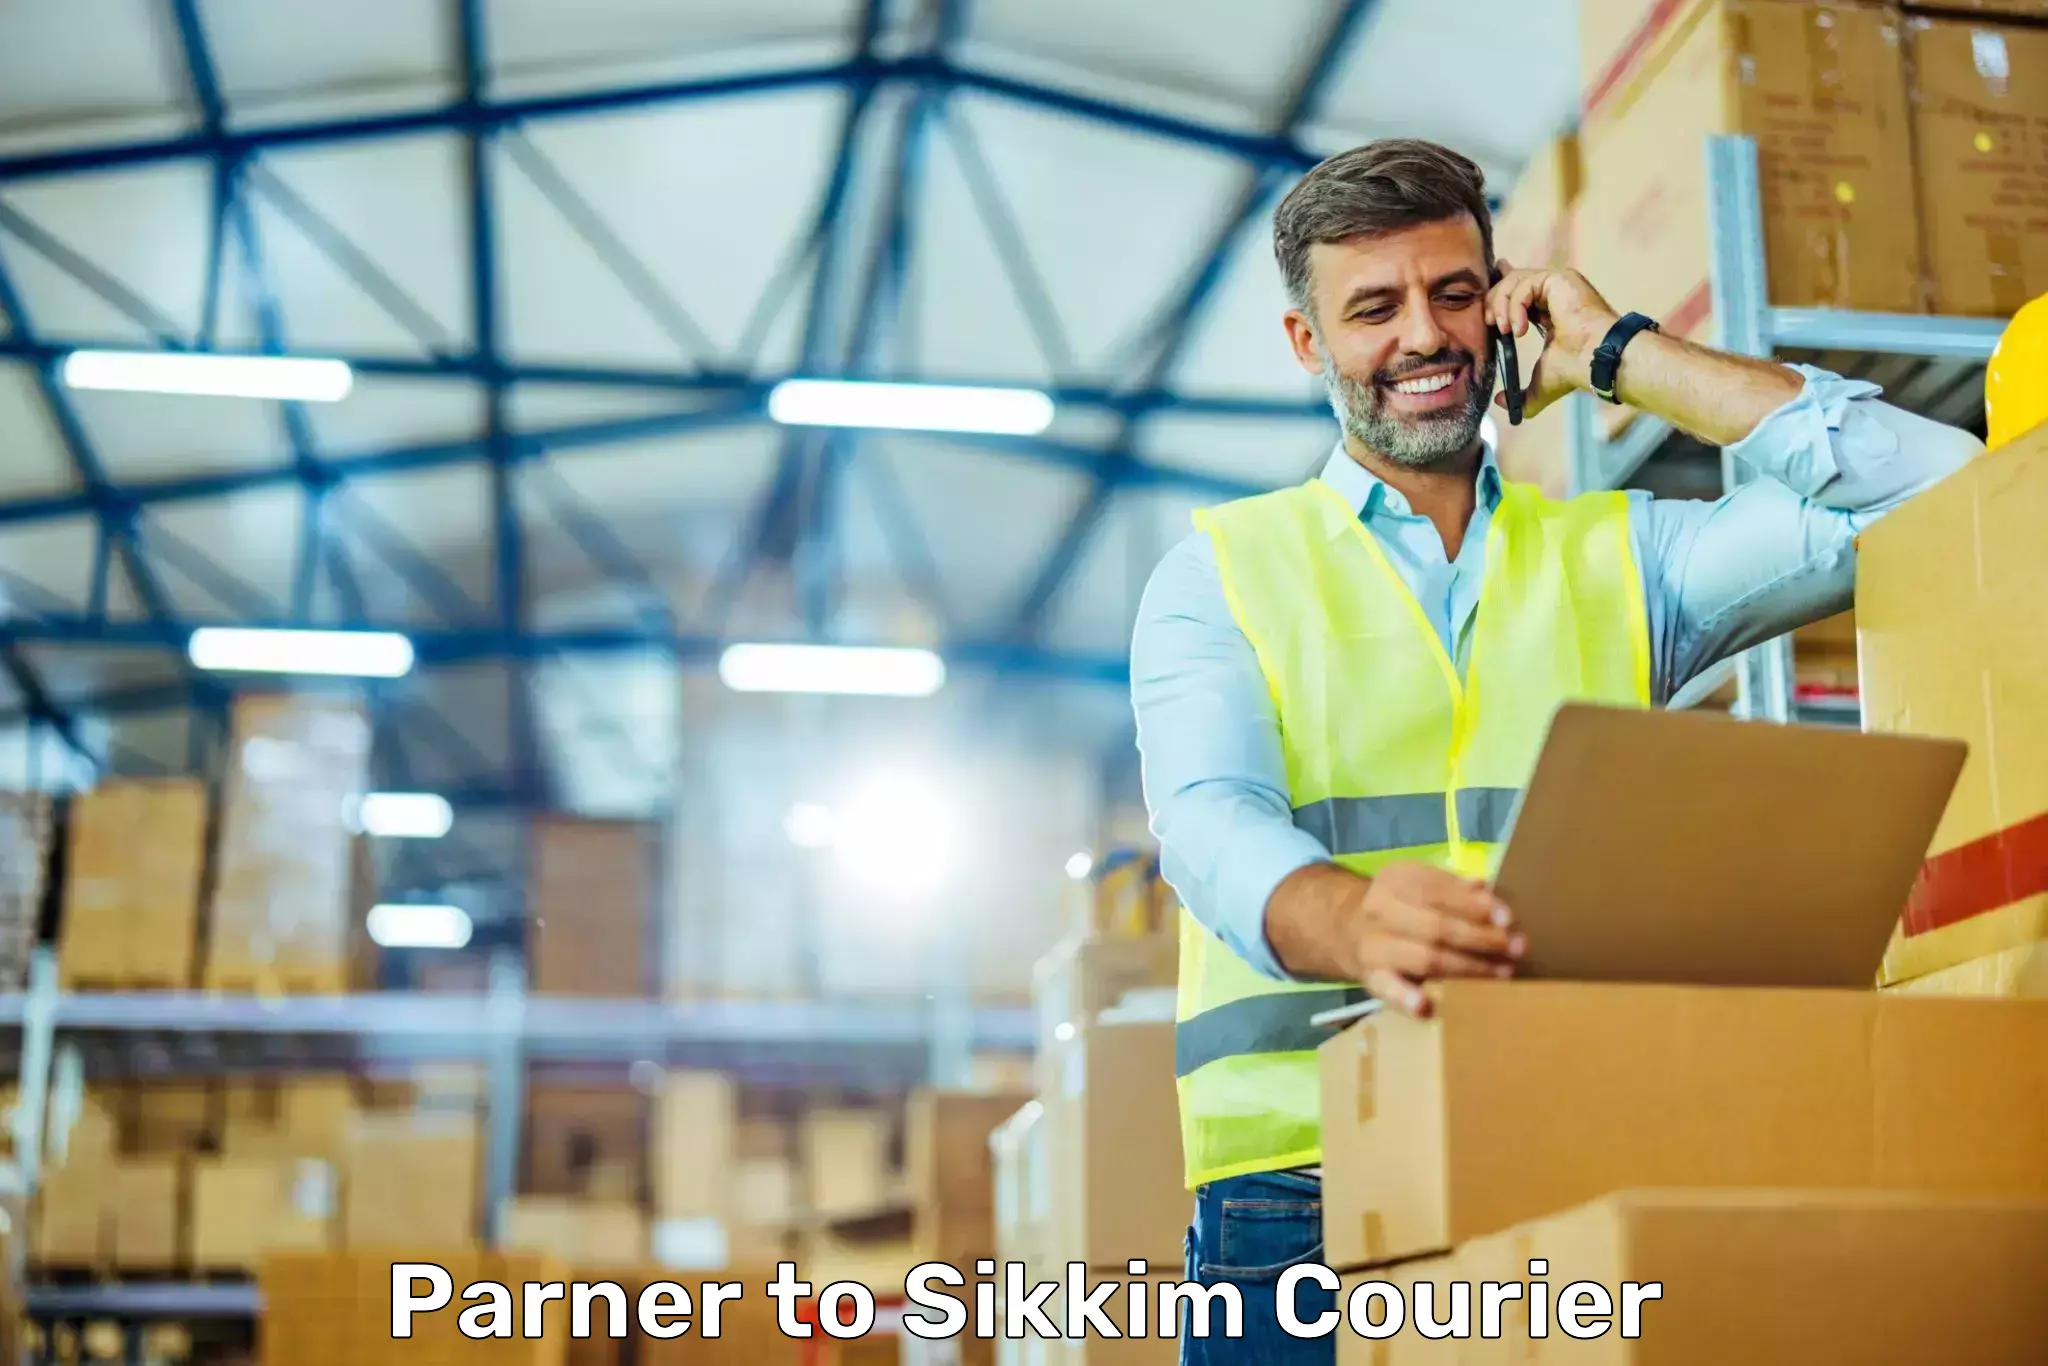 On-demand courier Parner to East Sikkim